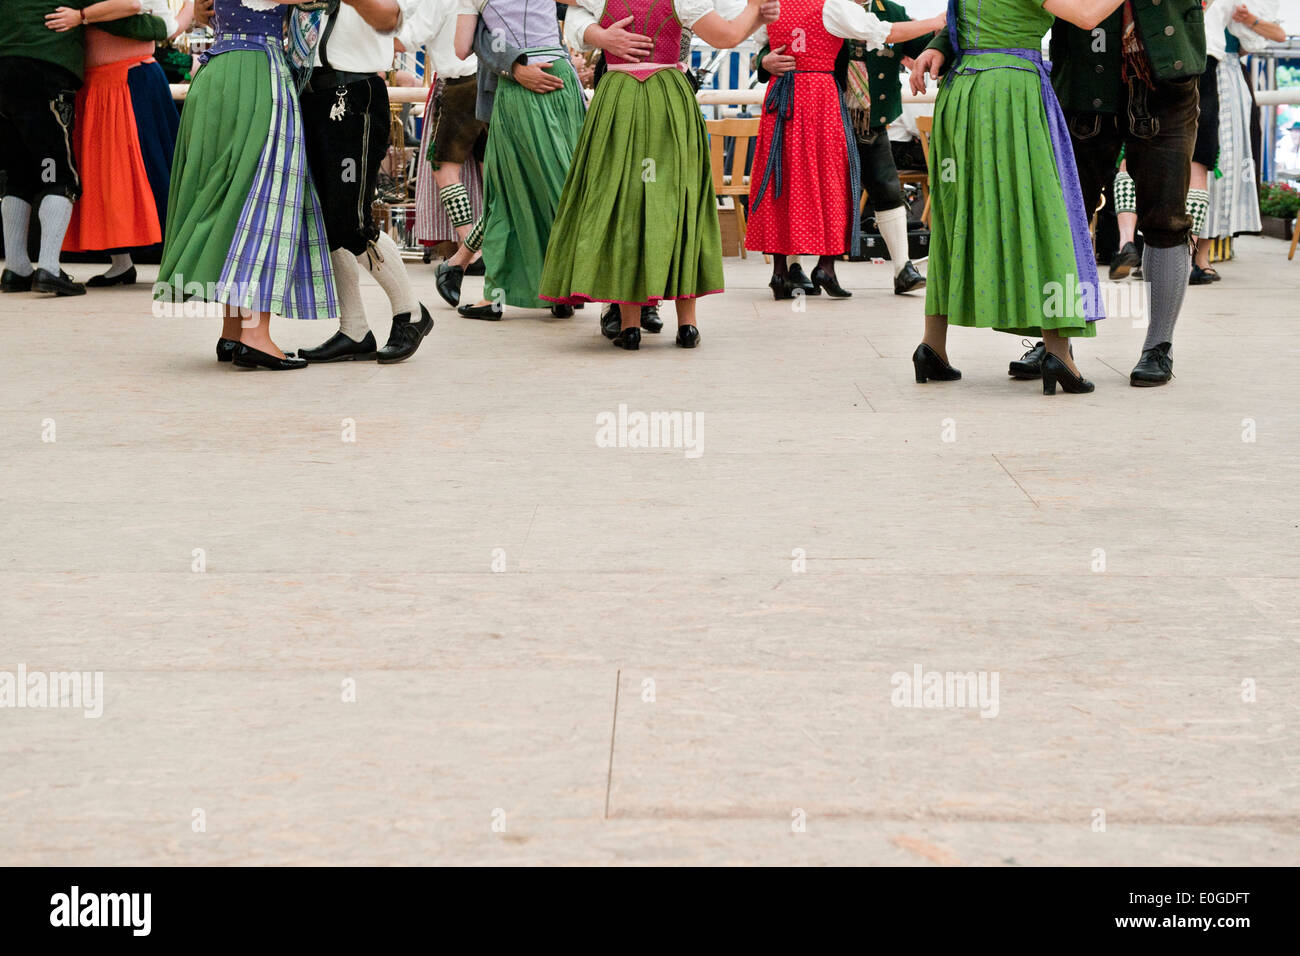 Men and women dancing at a festival, Christening of a bell, Antdorf, Bavaria, Germany Stock Photo